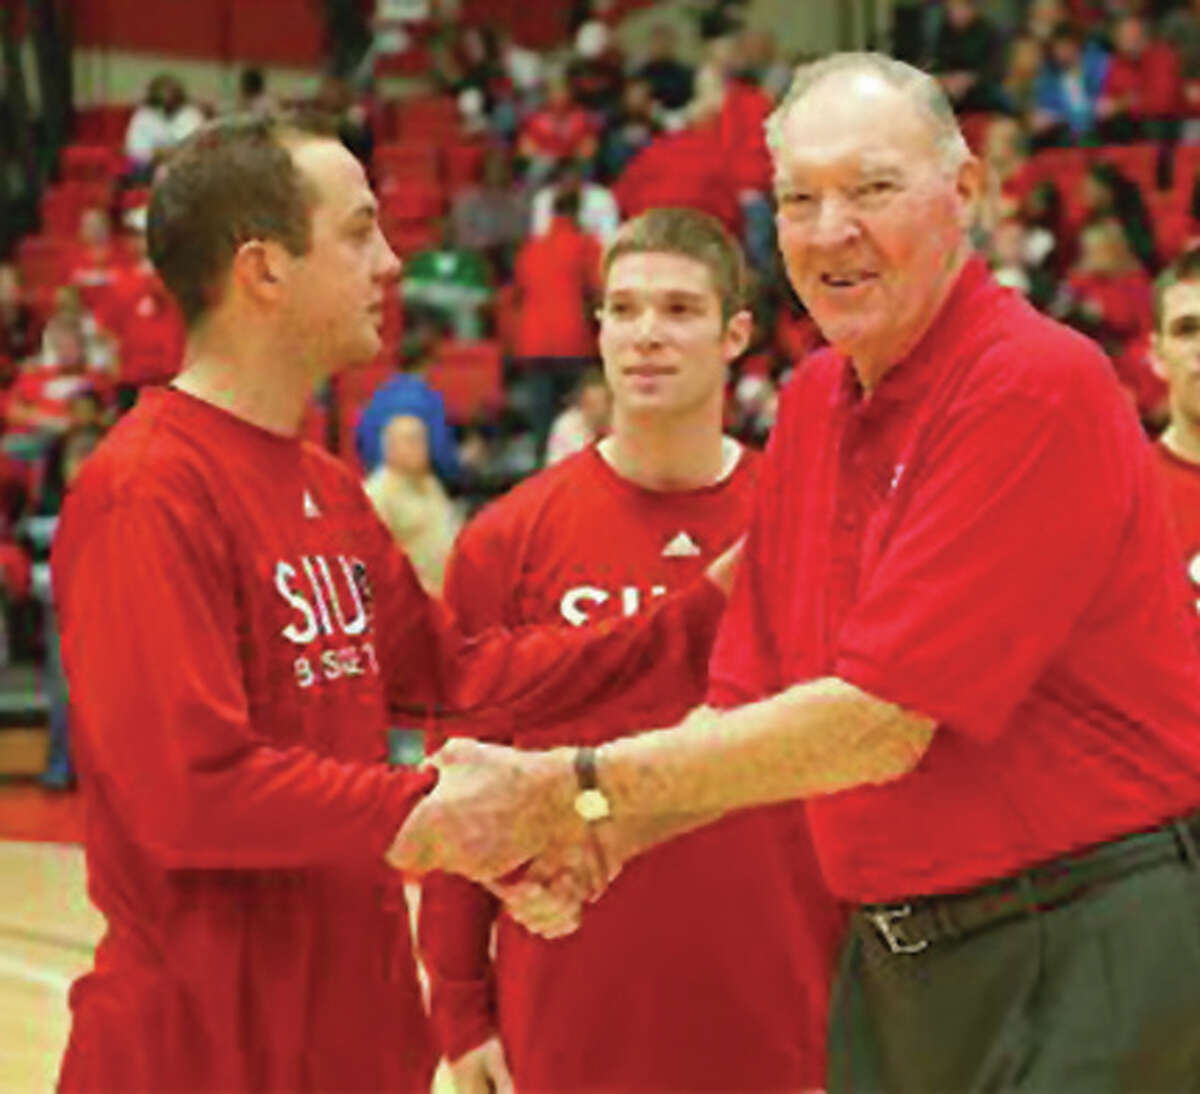 Basketball Hall of Famer Harry Gallatin (right) greets SIUE players Dane Church (left) and Stephen Jones (center) during a ceremony during the 2008-09 season at Vadalabene Center in Edwardsville. Gallatin, a Roxana native and SIUE Hall of Famer, died Wednesday at age 88.